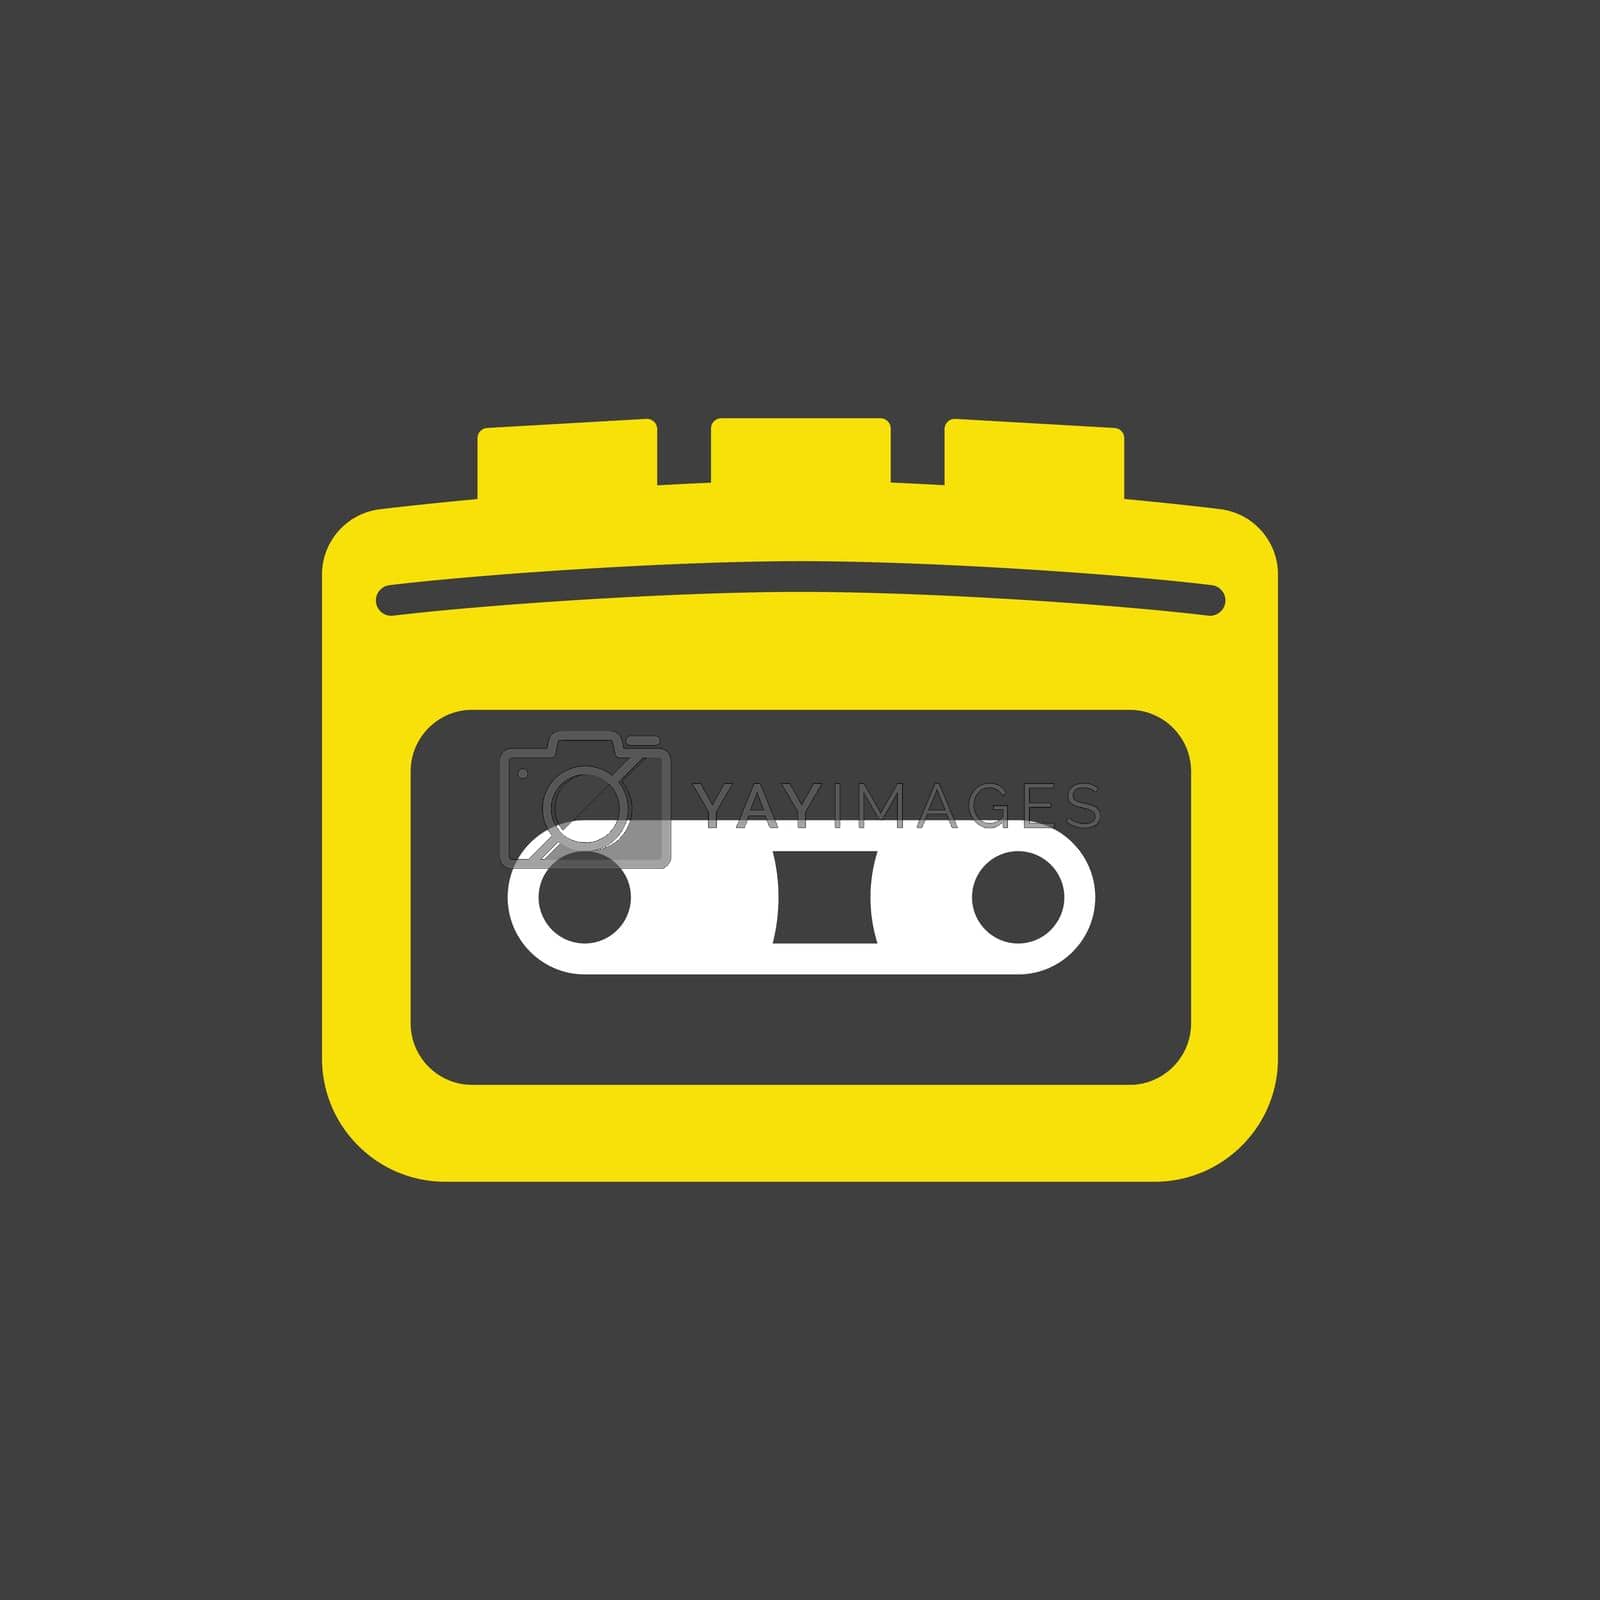 Royalty free image of Cassette player vector flat icon by nosik